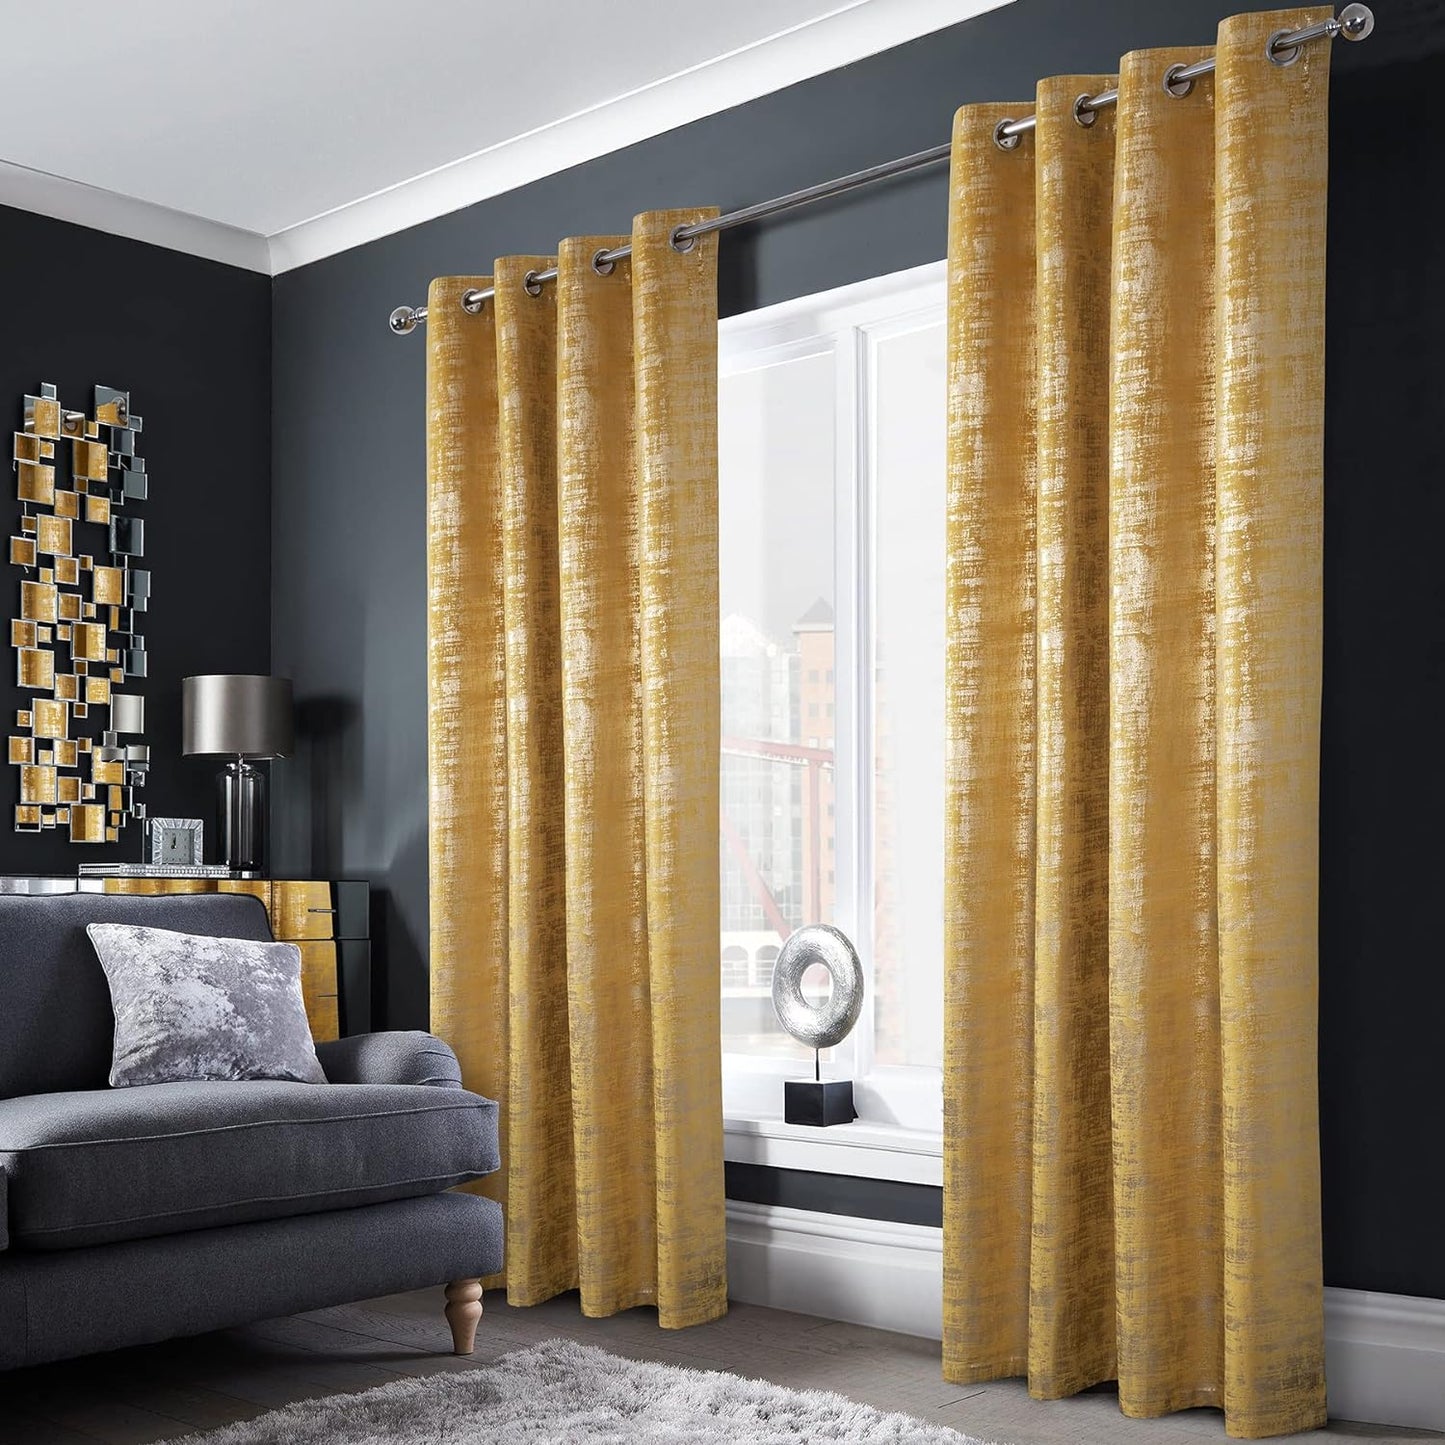 Always4U Soft Velvet Curtains 95 Inch Length Luxury Bedroom Curtains Gold Foil Print Window Curtains for Living Room 1 Panel White  always4u Yellow (Gold Print) 2 Panels: 52''W*95''L 